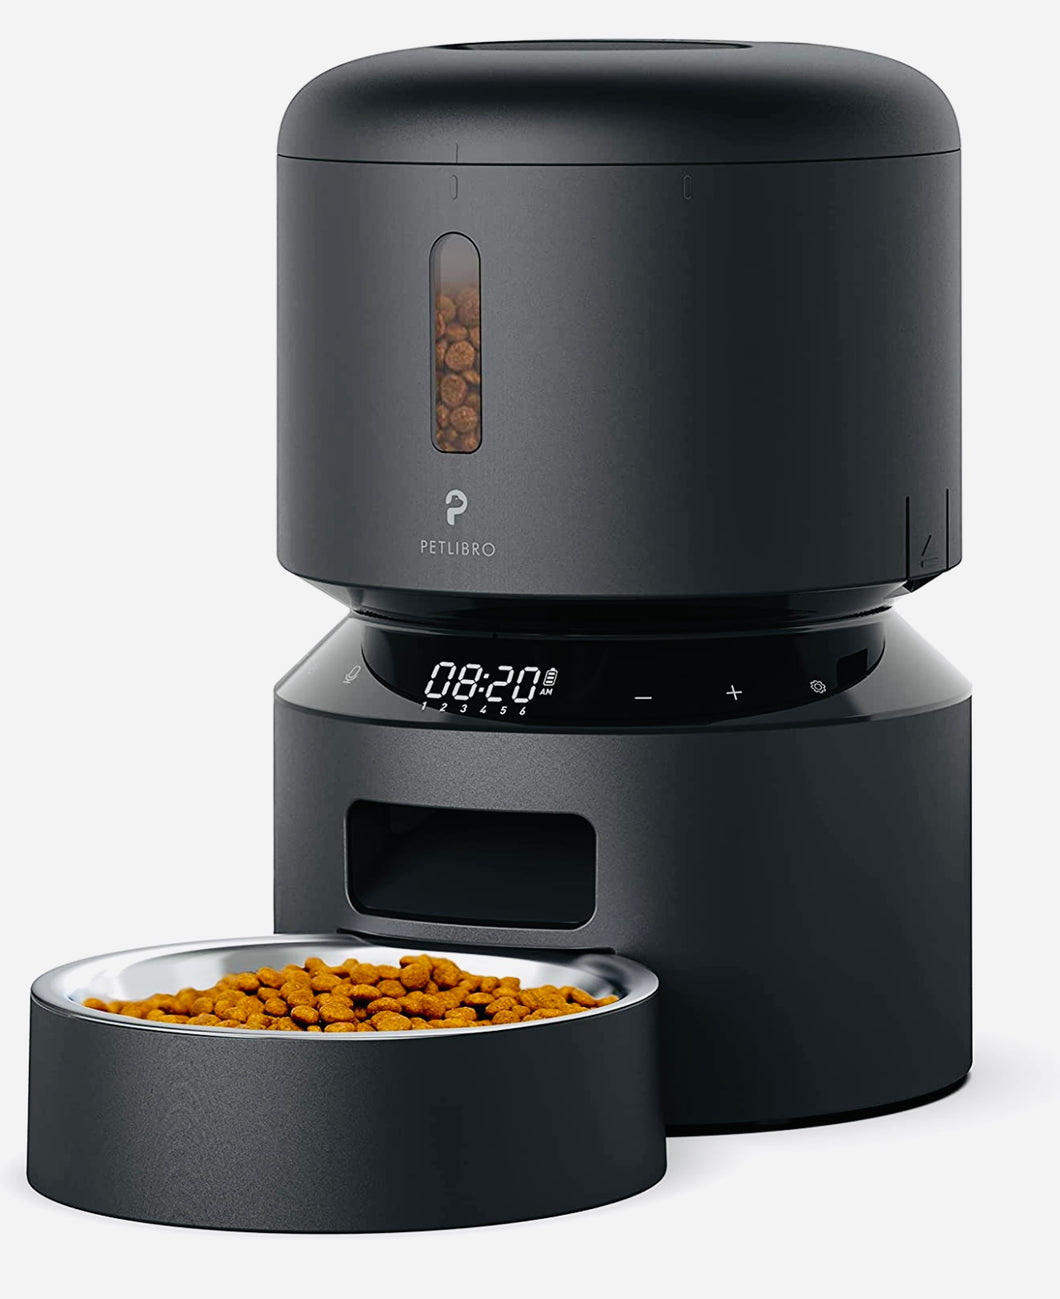 PETLIBRO Automatic cat feeder up to 50 portions 6 meal for cat/dog